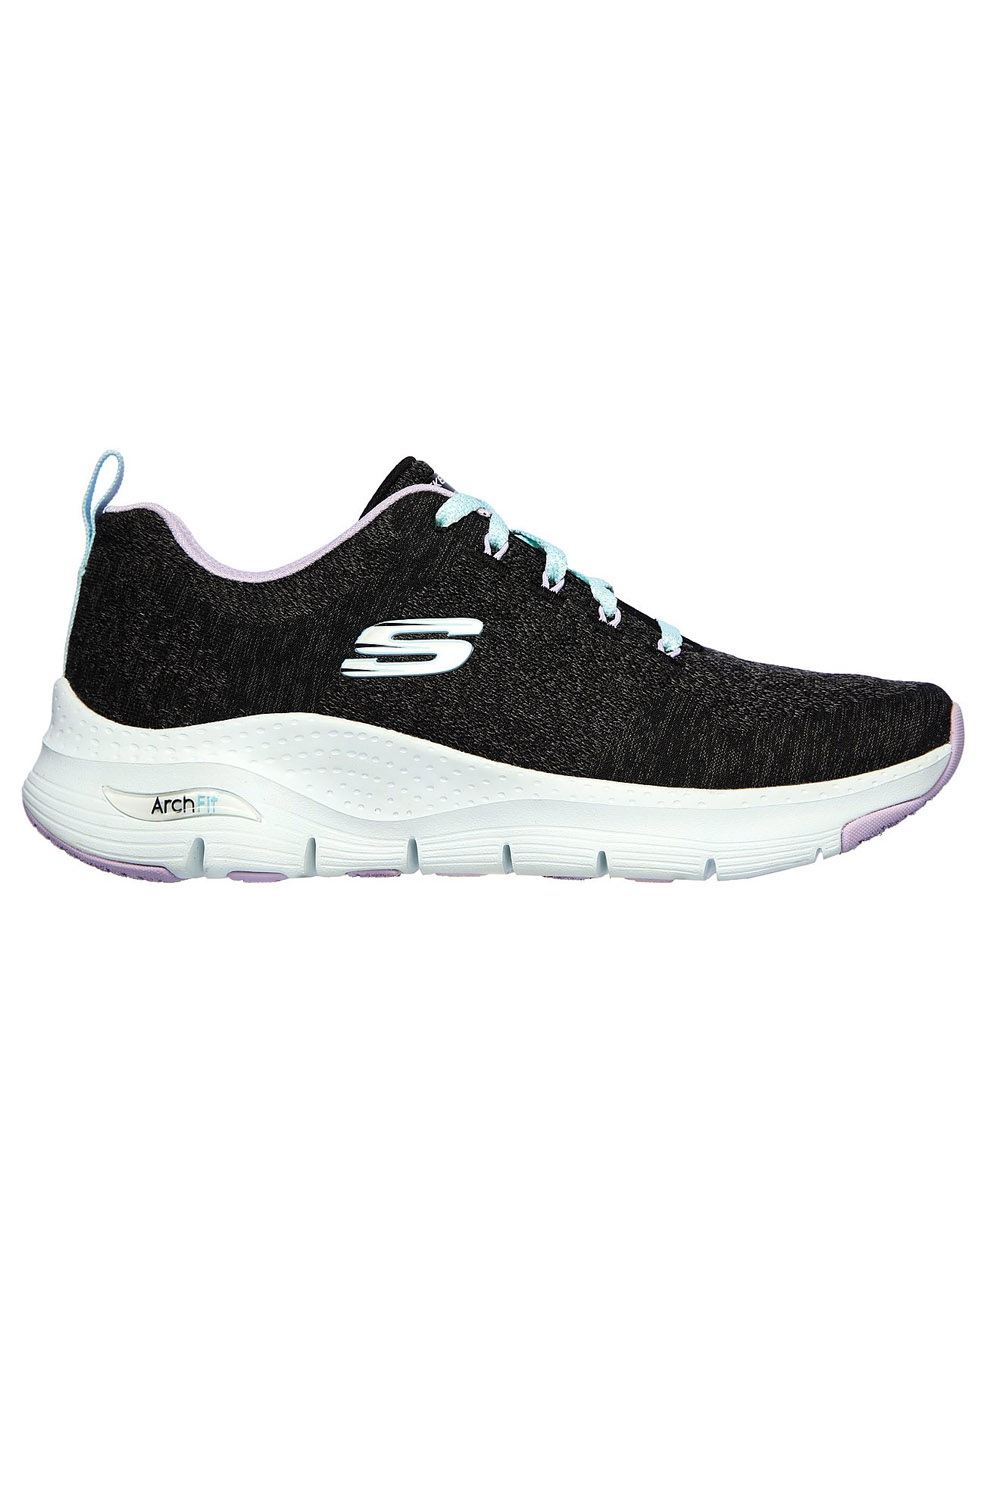 Skechers Womens Arch Fit Comfy Wave Trainers Cushioned Lace Up Mesh ...